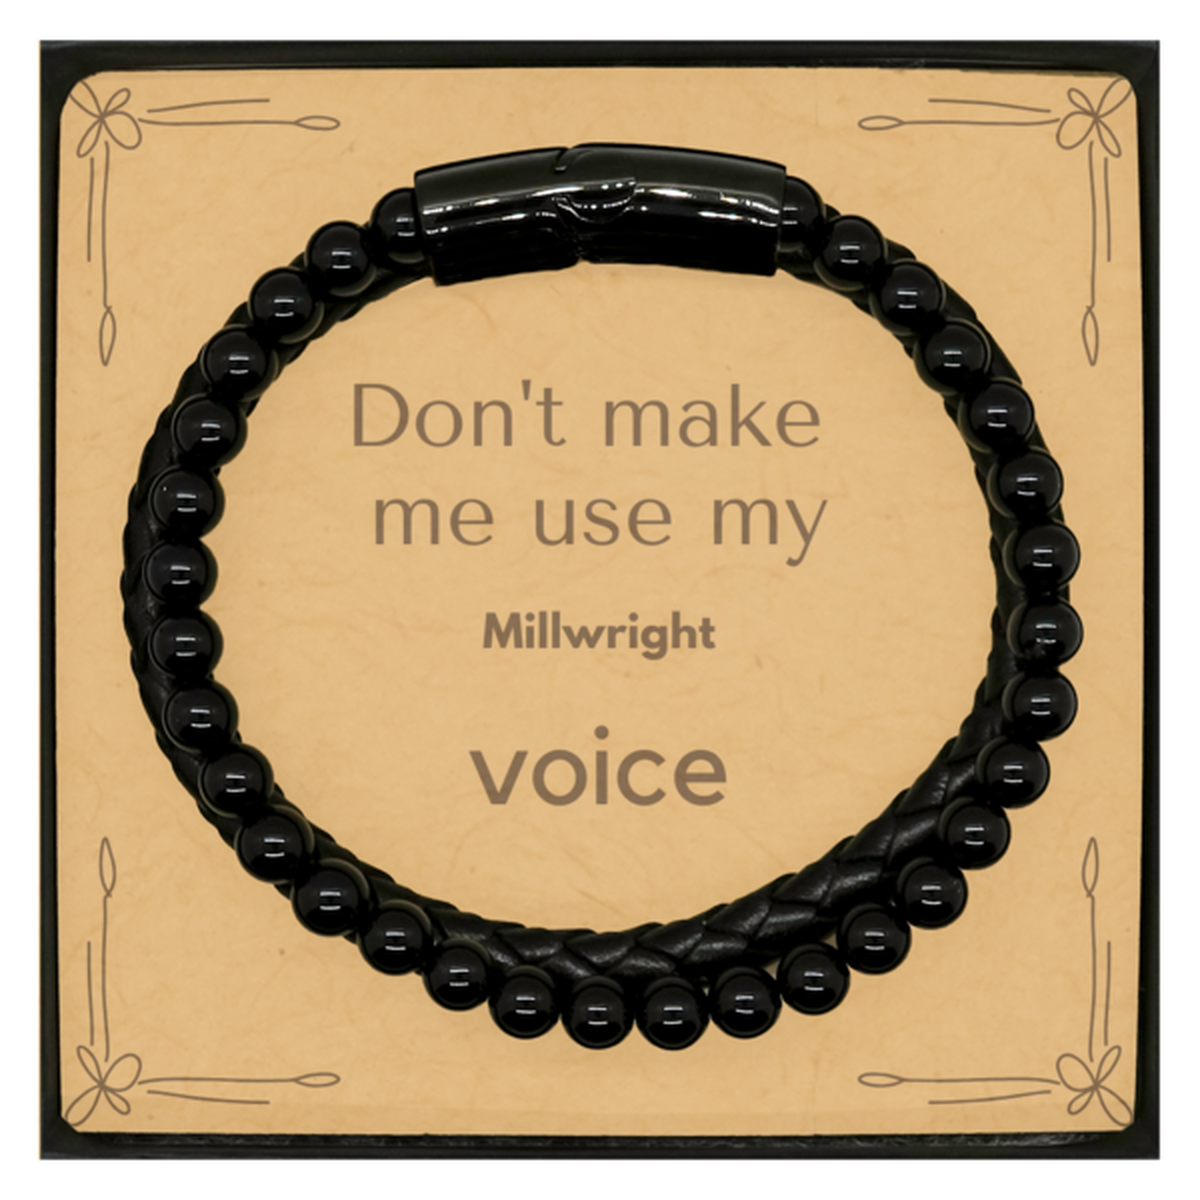 Don't make me use my Millwright voice, Sarcasm Millwright Card Gifts, Christmas Millwright Stone Leather Bracelets Birthday Unique Gifts For Millwright Coworkers, Men, Women, Colleague, Friends